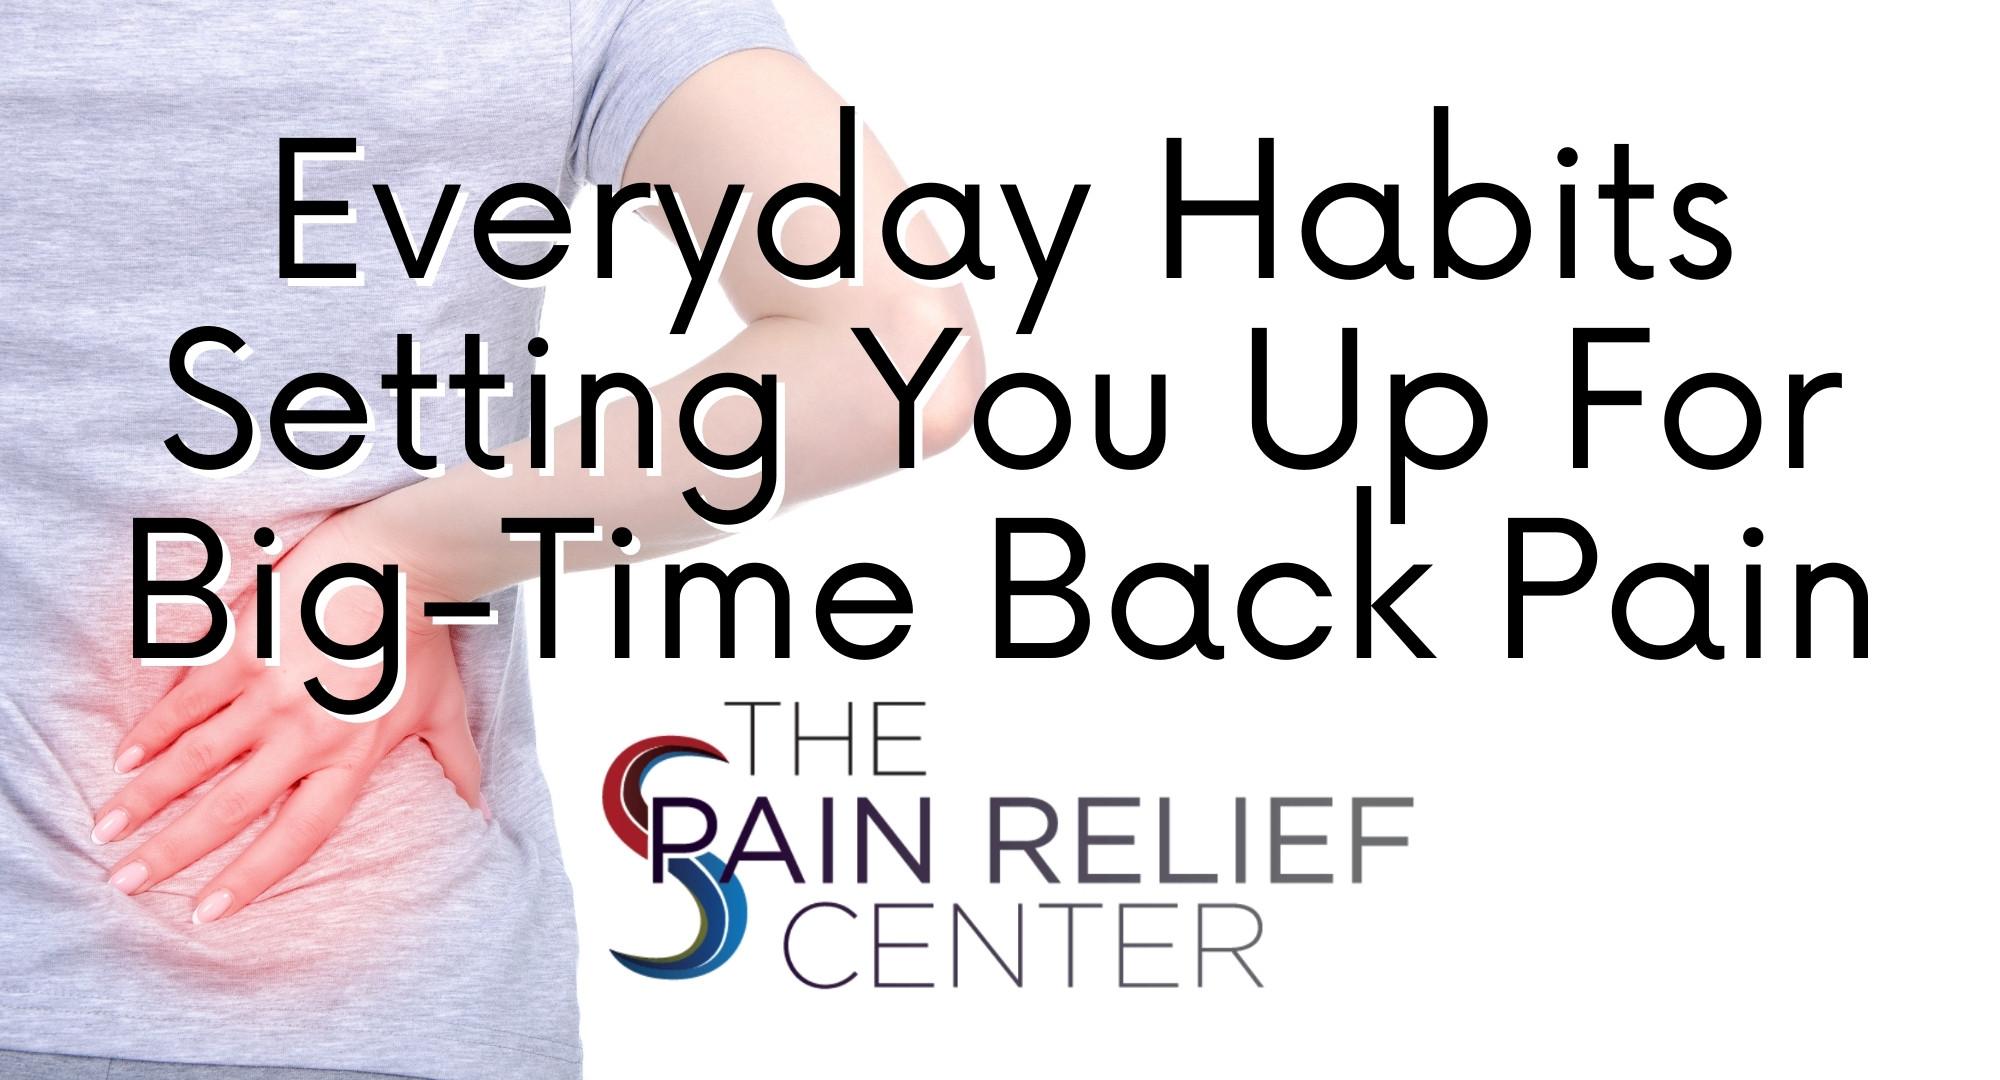 Habits that Cause Back Pain